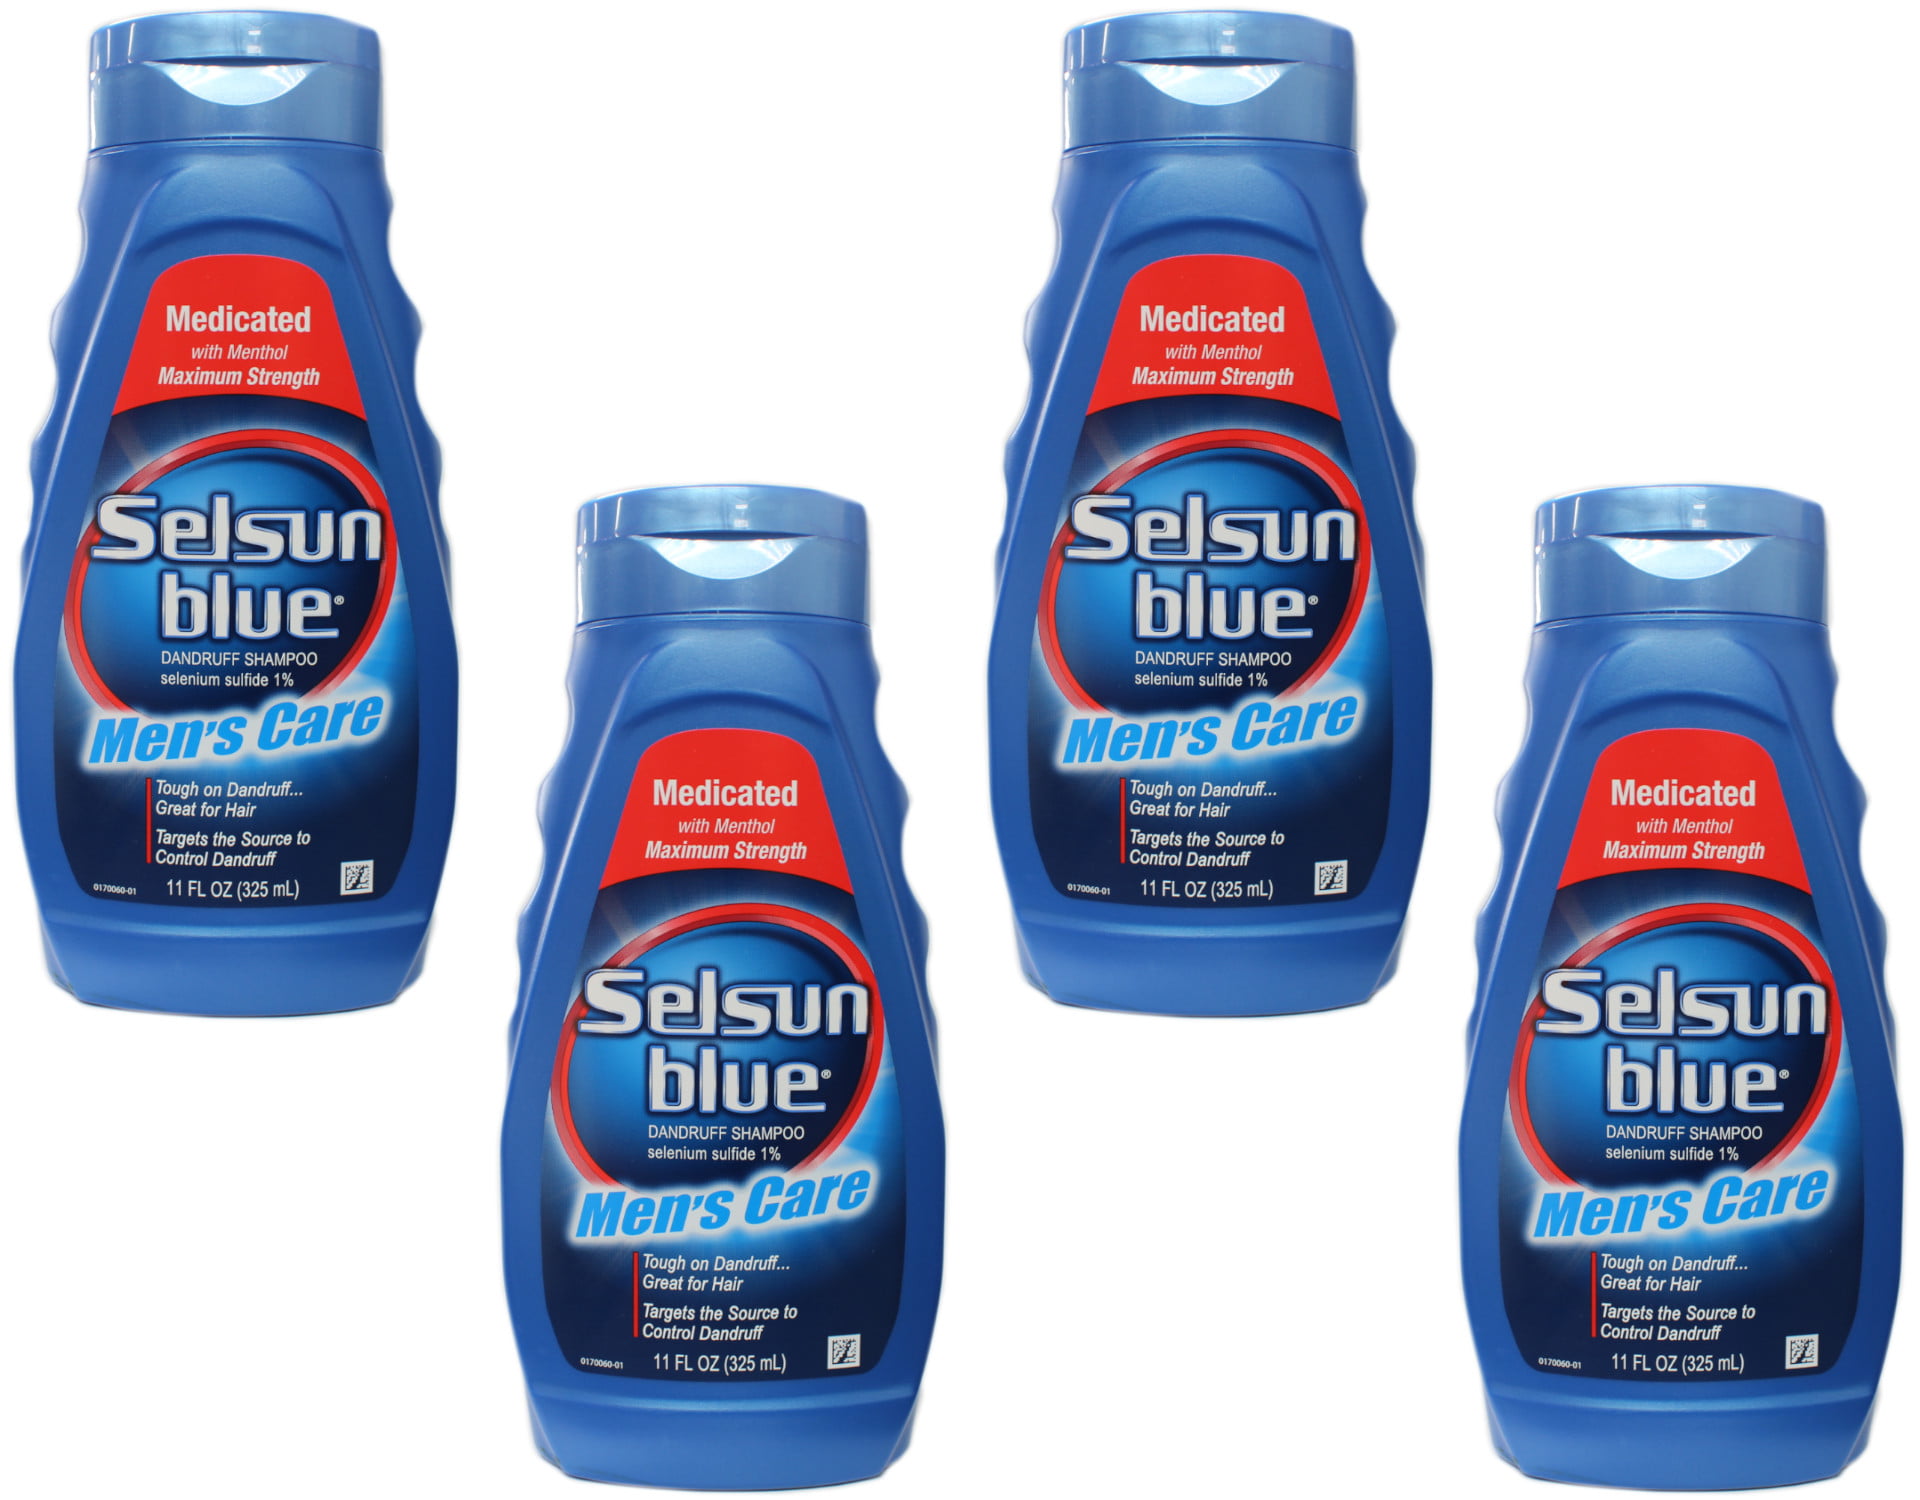 1. "Selsun Blue: Does It Lighten Dyed Hair?" 
2. "Can Selsun Blue Remove Hair Dye?" 
3. "Selsun Blue for Lightening Hair Dye" 
4. "How to Use Selsun Blue to Lighten Dyed Hair" 
5. "Selsun Blue and Hair Dye: What You Need to Know" 
6. "Selsun Blue: A Natural Way to Lighten Dyed Hair" 
7. "The Effects of Selsun Blue on Dyed Hair" 
8. "Selsun Blue vs. Traditional Hair Lighteners" 
9. "Using Selsun Blue to Lighten Hair Dye: Tips and Tricks" 
10. "Selsun Blue: The Safest Option for Lightening Dyed Hair" - wide 5